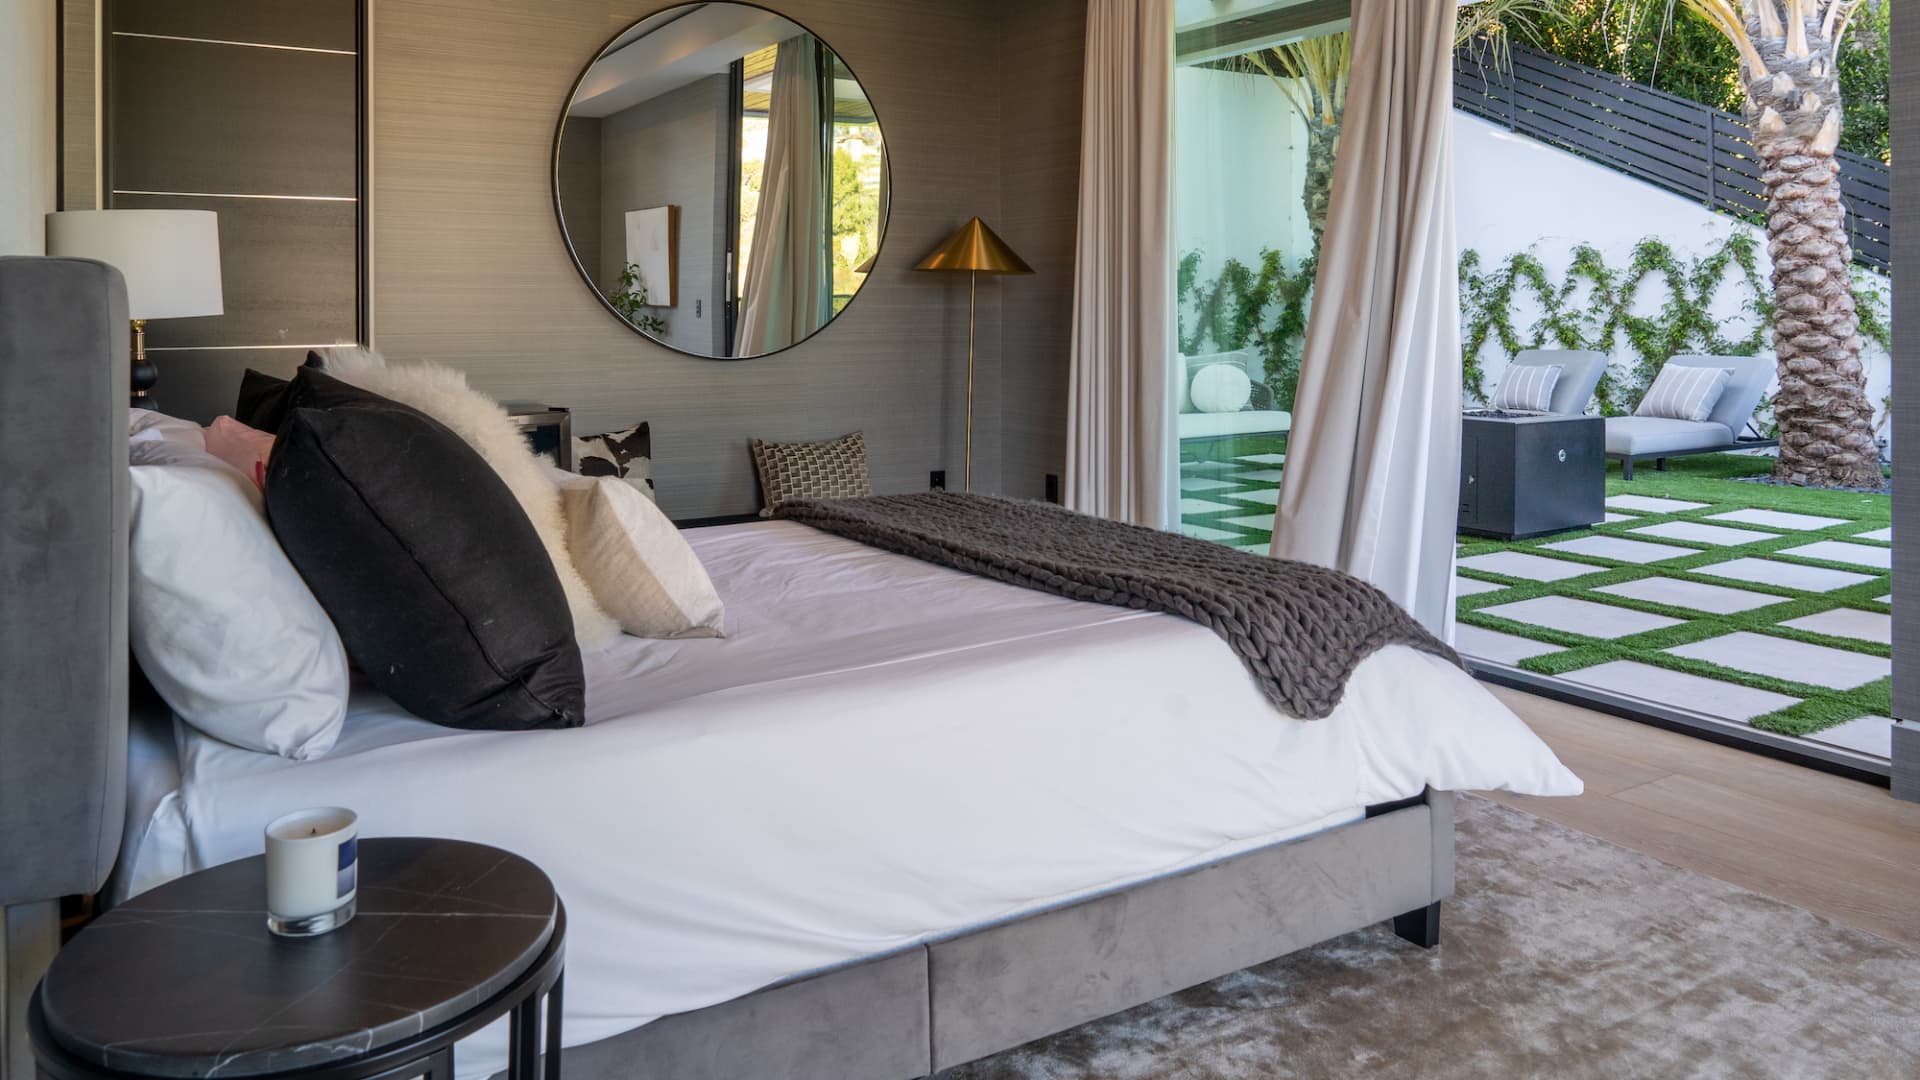 One of the residence's seven ensuite bedrooms with a private terrace.